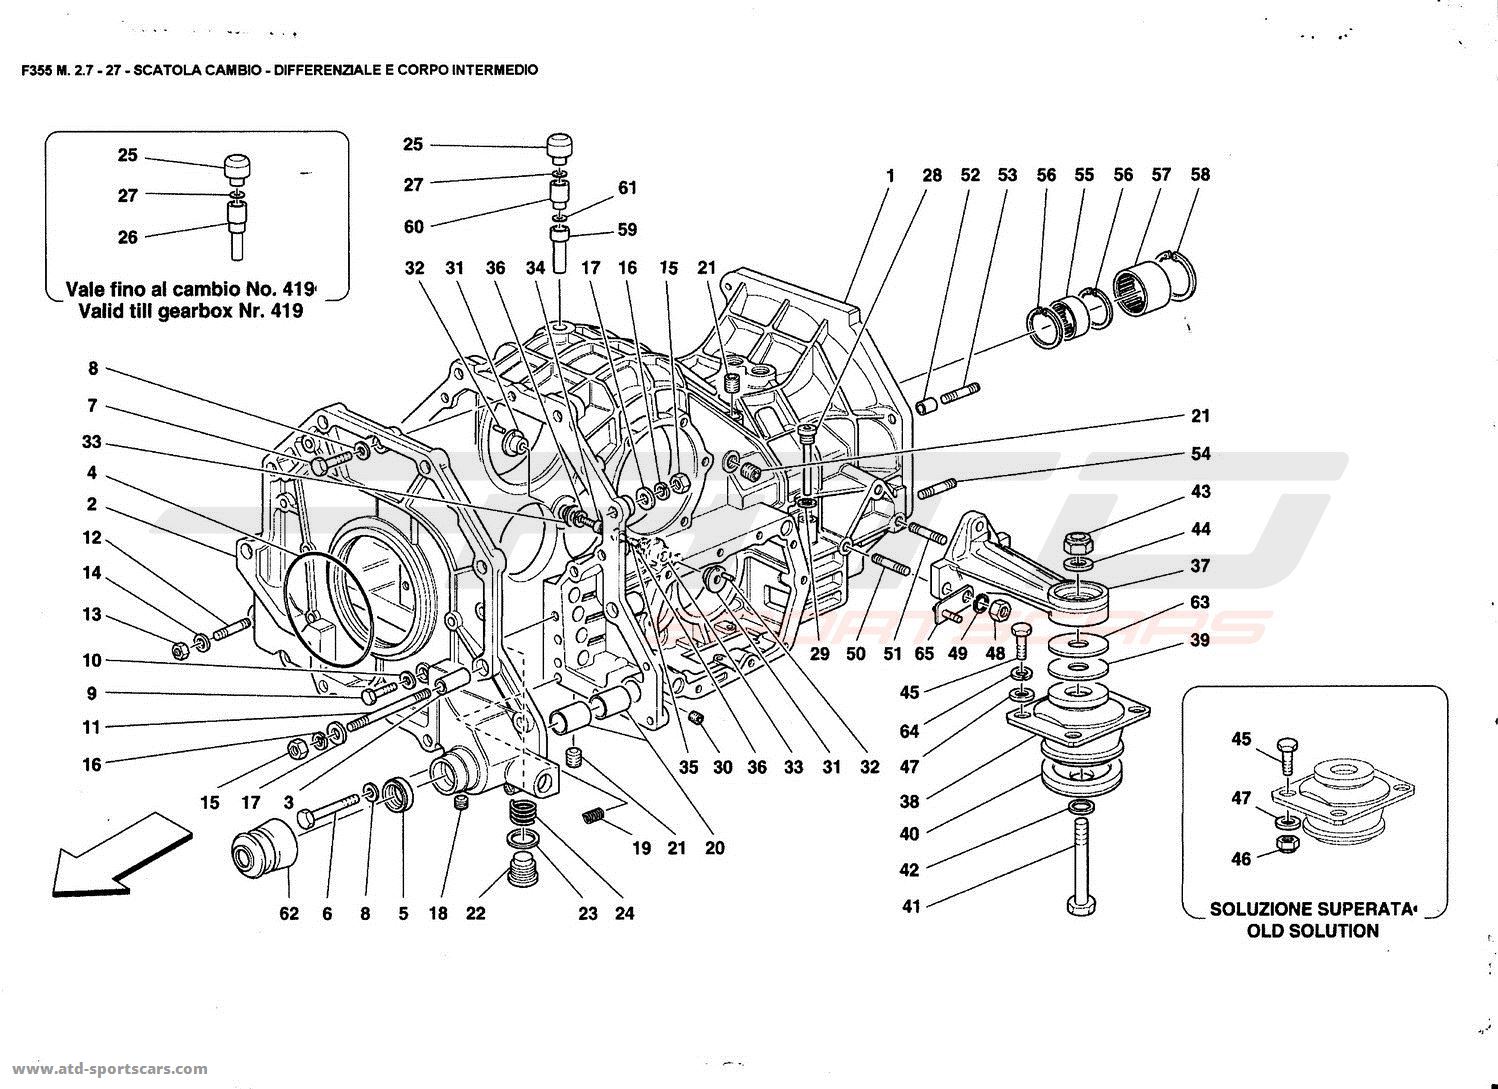 GEARBOX - DIFFERENTIAL HOUSING ANO INTERMEDIATE CASING